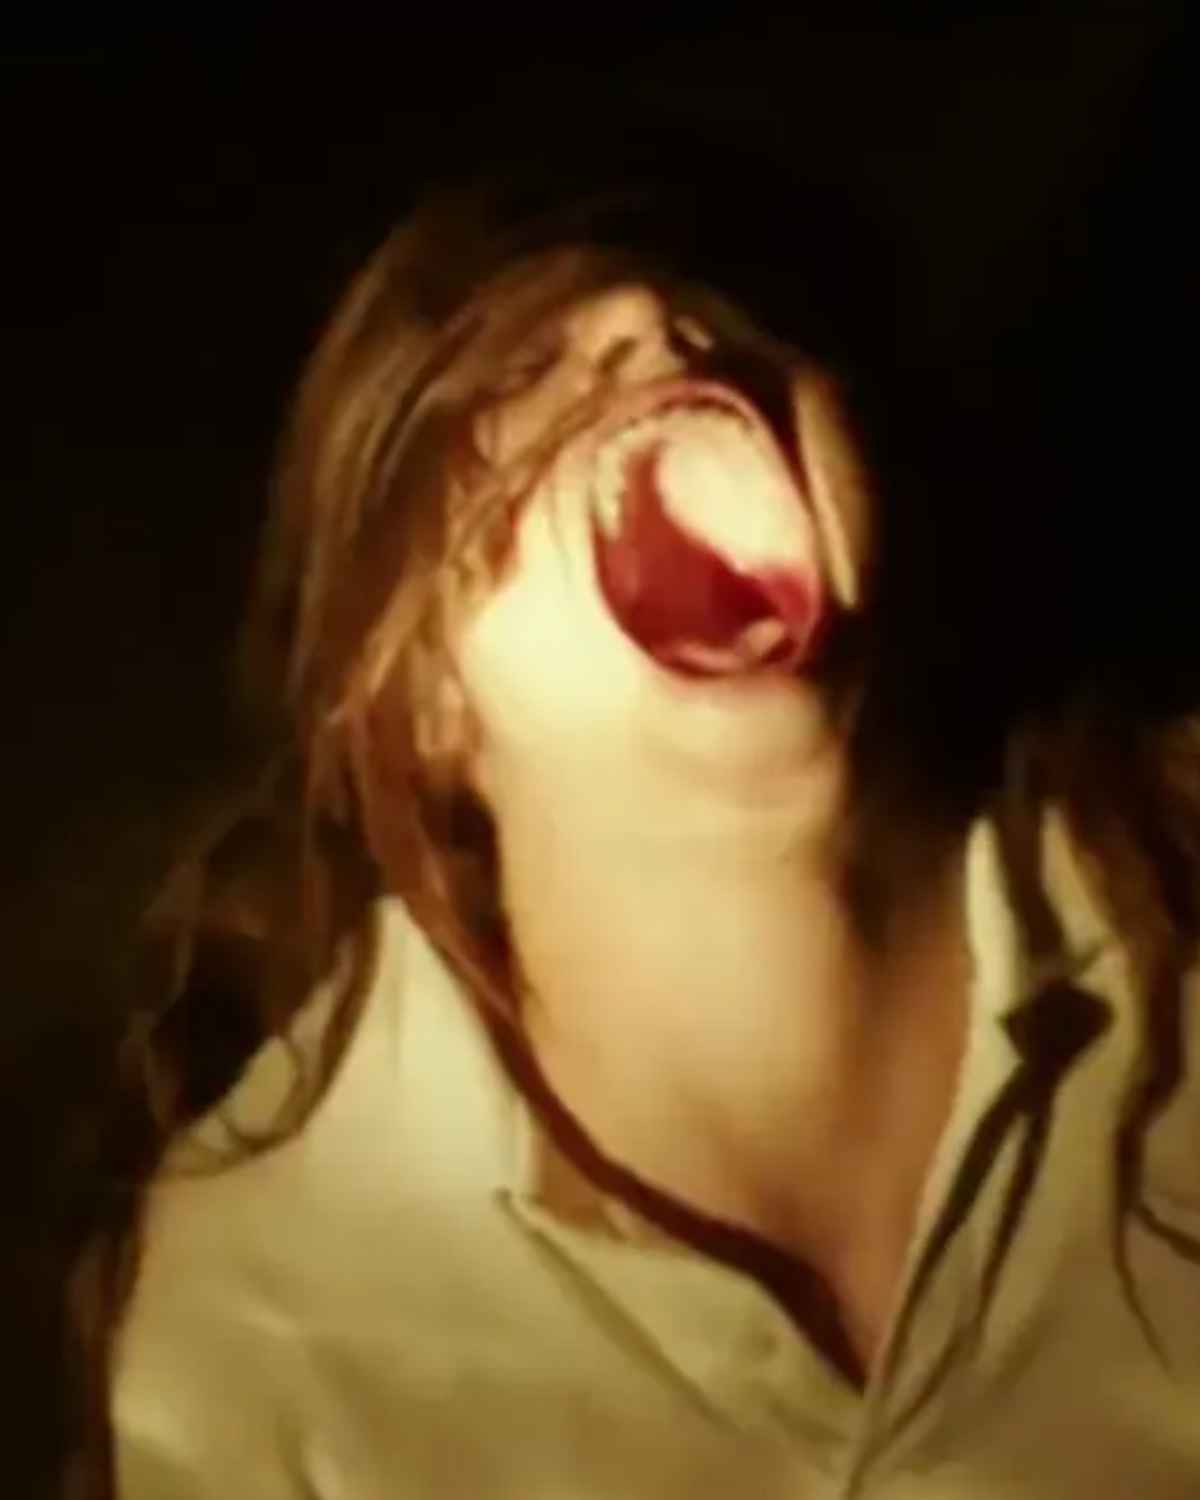 Netflix Horror Movie Is So Scary Viewers Are Turning It Off Halfway Through